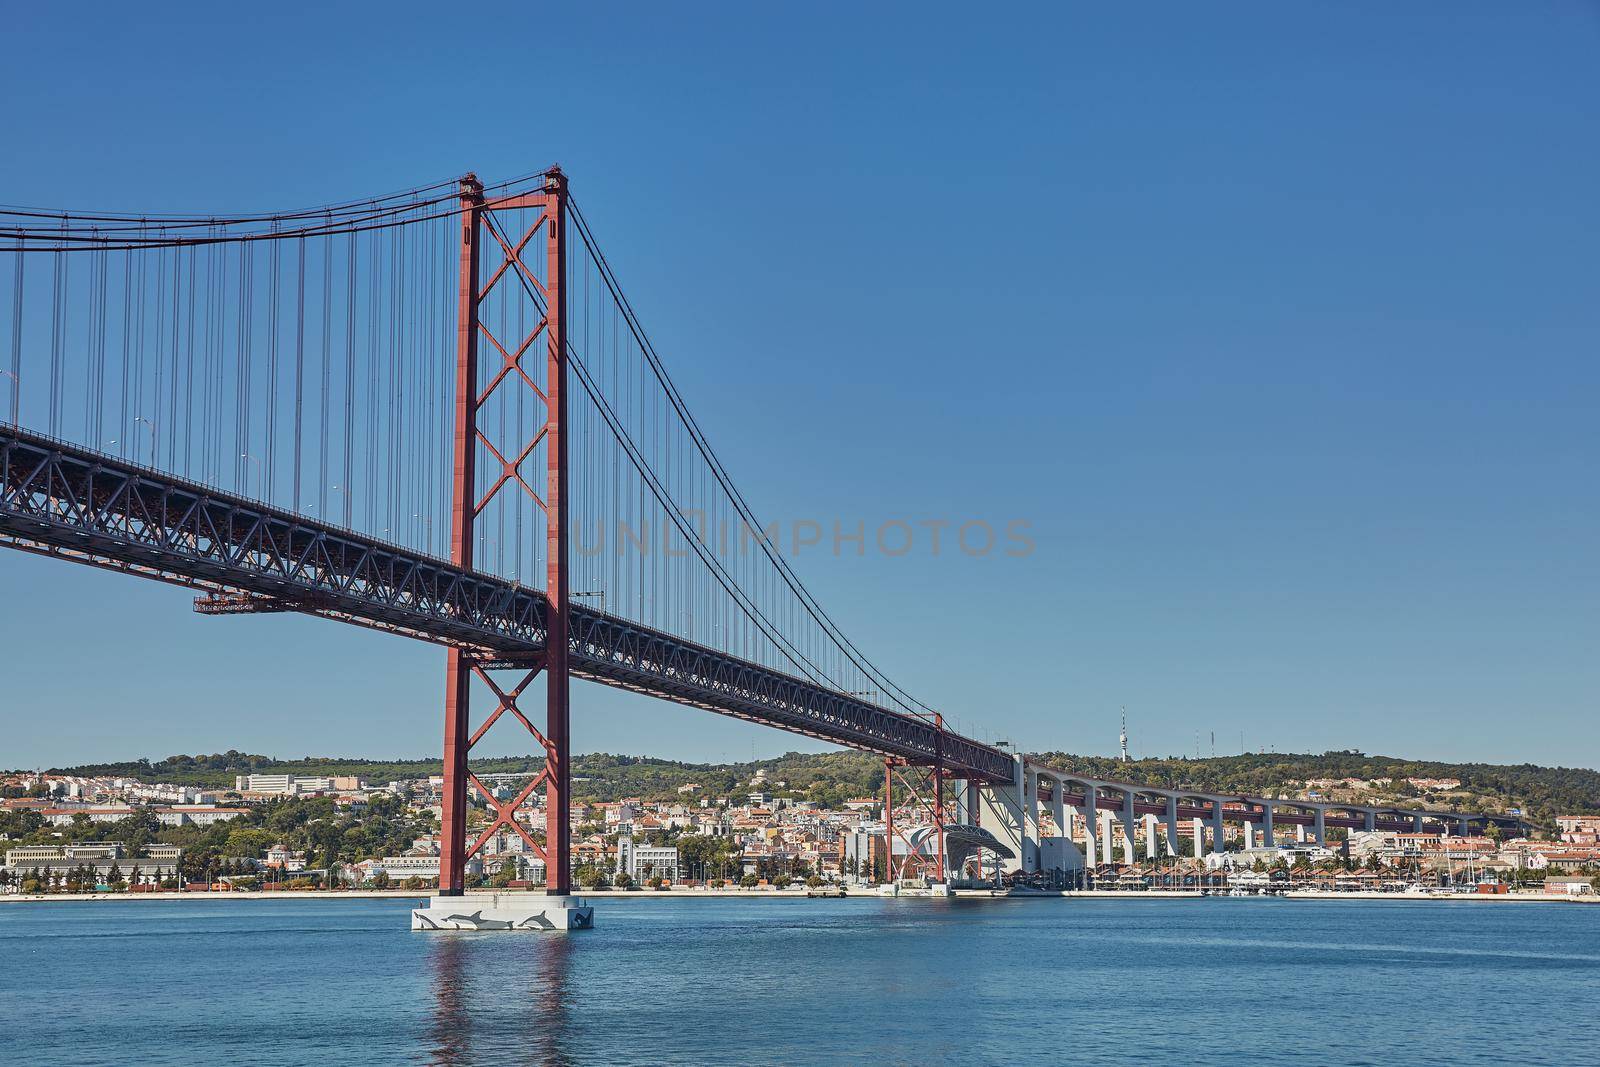 The 25 April bridge (Ponte 25 de Abril) is a steel suspension bridge located in Lisbon, Portugal, crossing the Tagus river. It is one of the most famous landmarks of the region